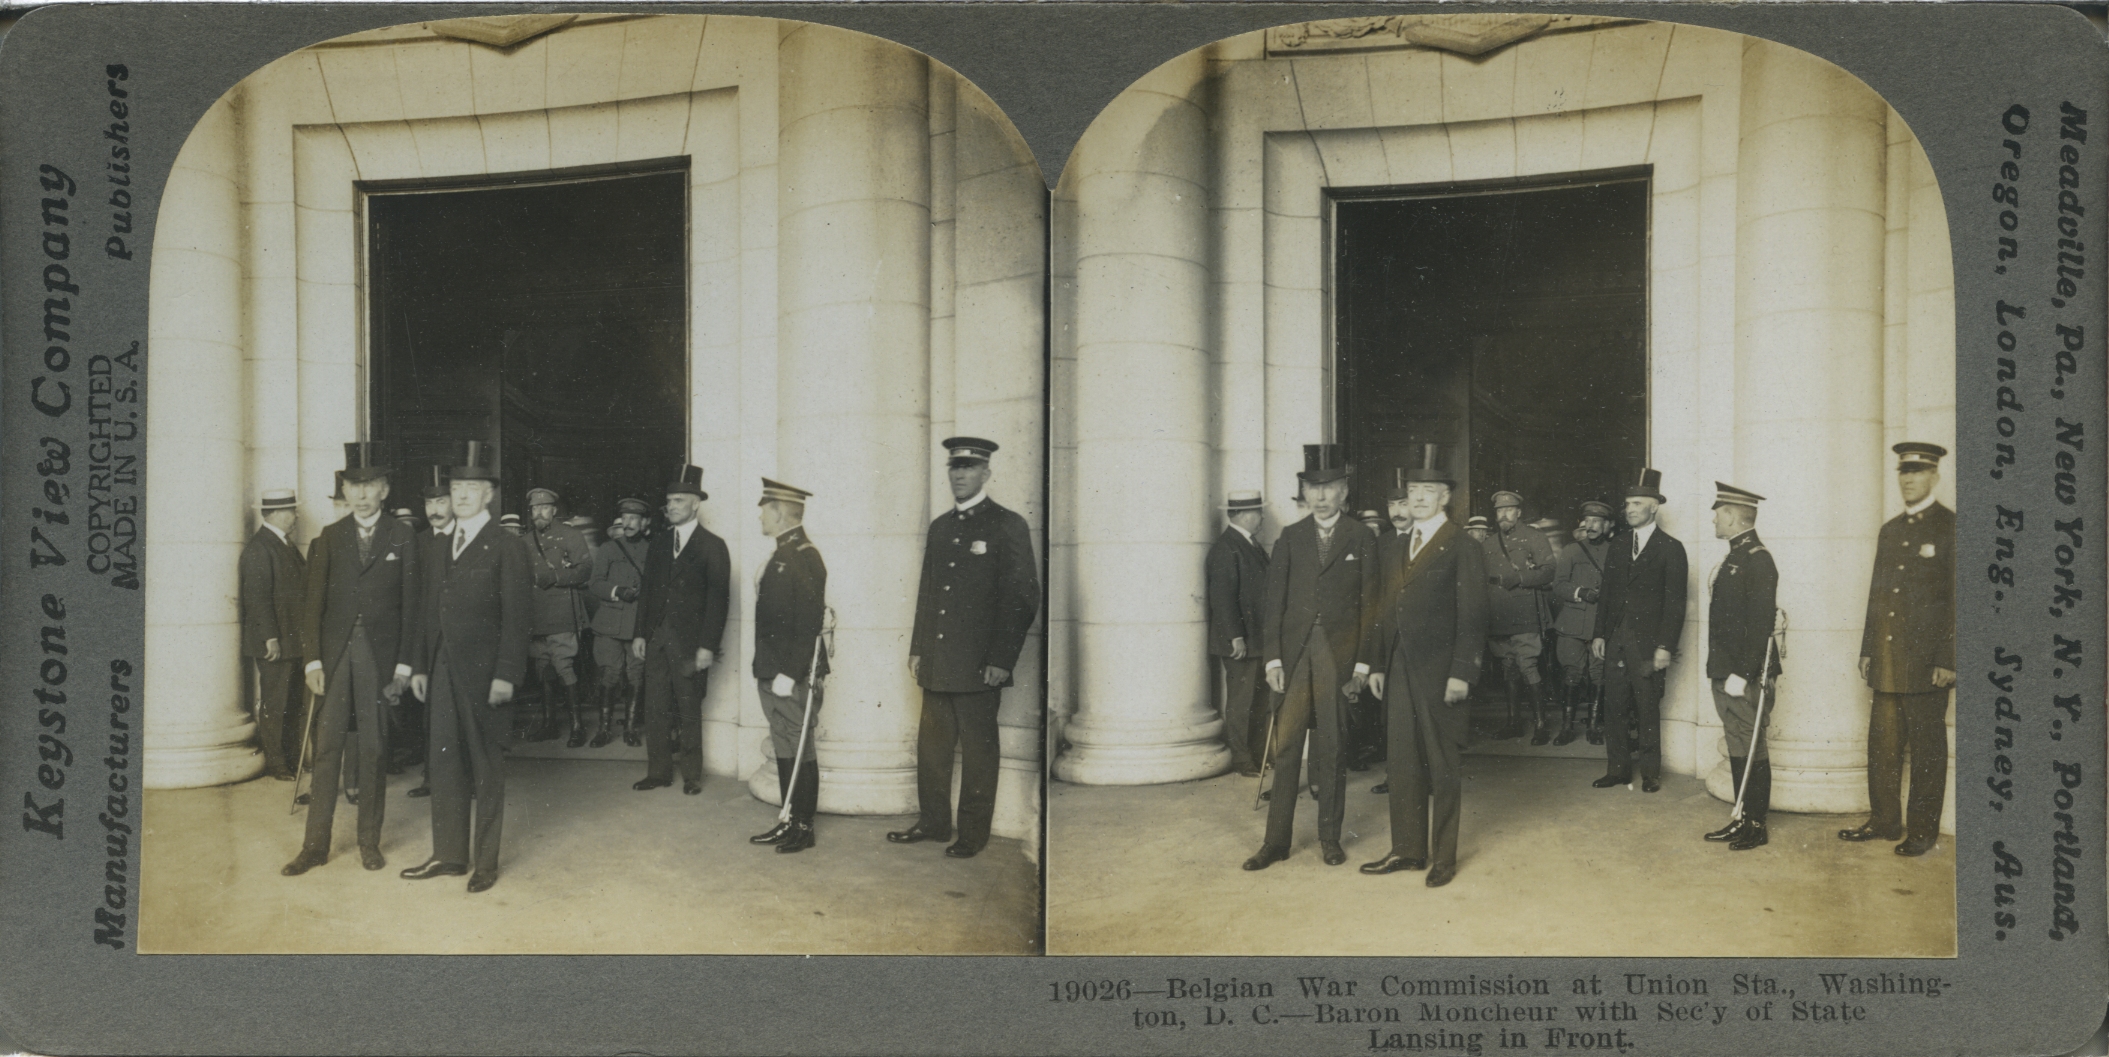 Belgian War Commission at Union Sta., Washington, D.C. - Baron Moncheur with Sec'y of State Lansing in Front.